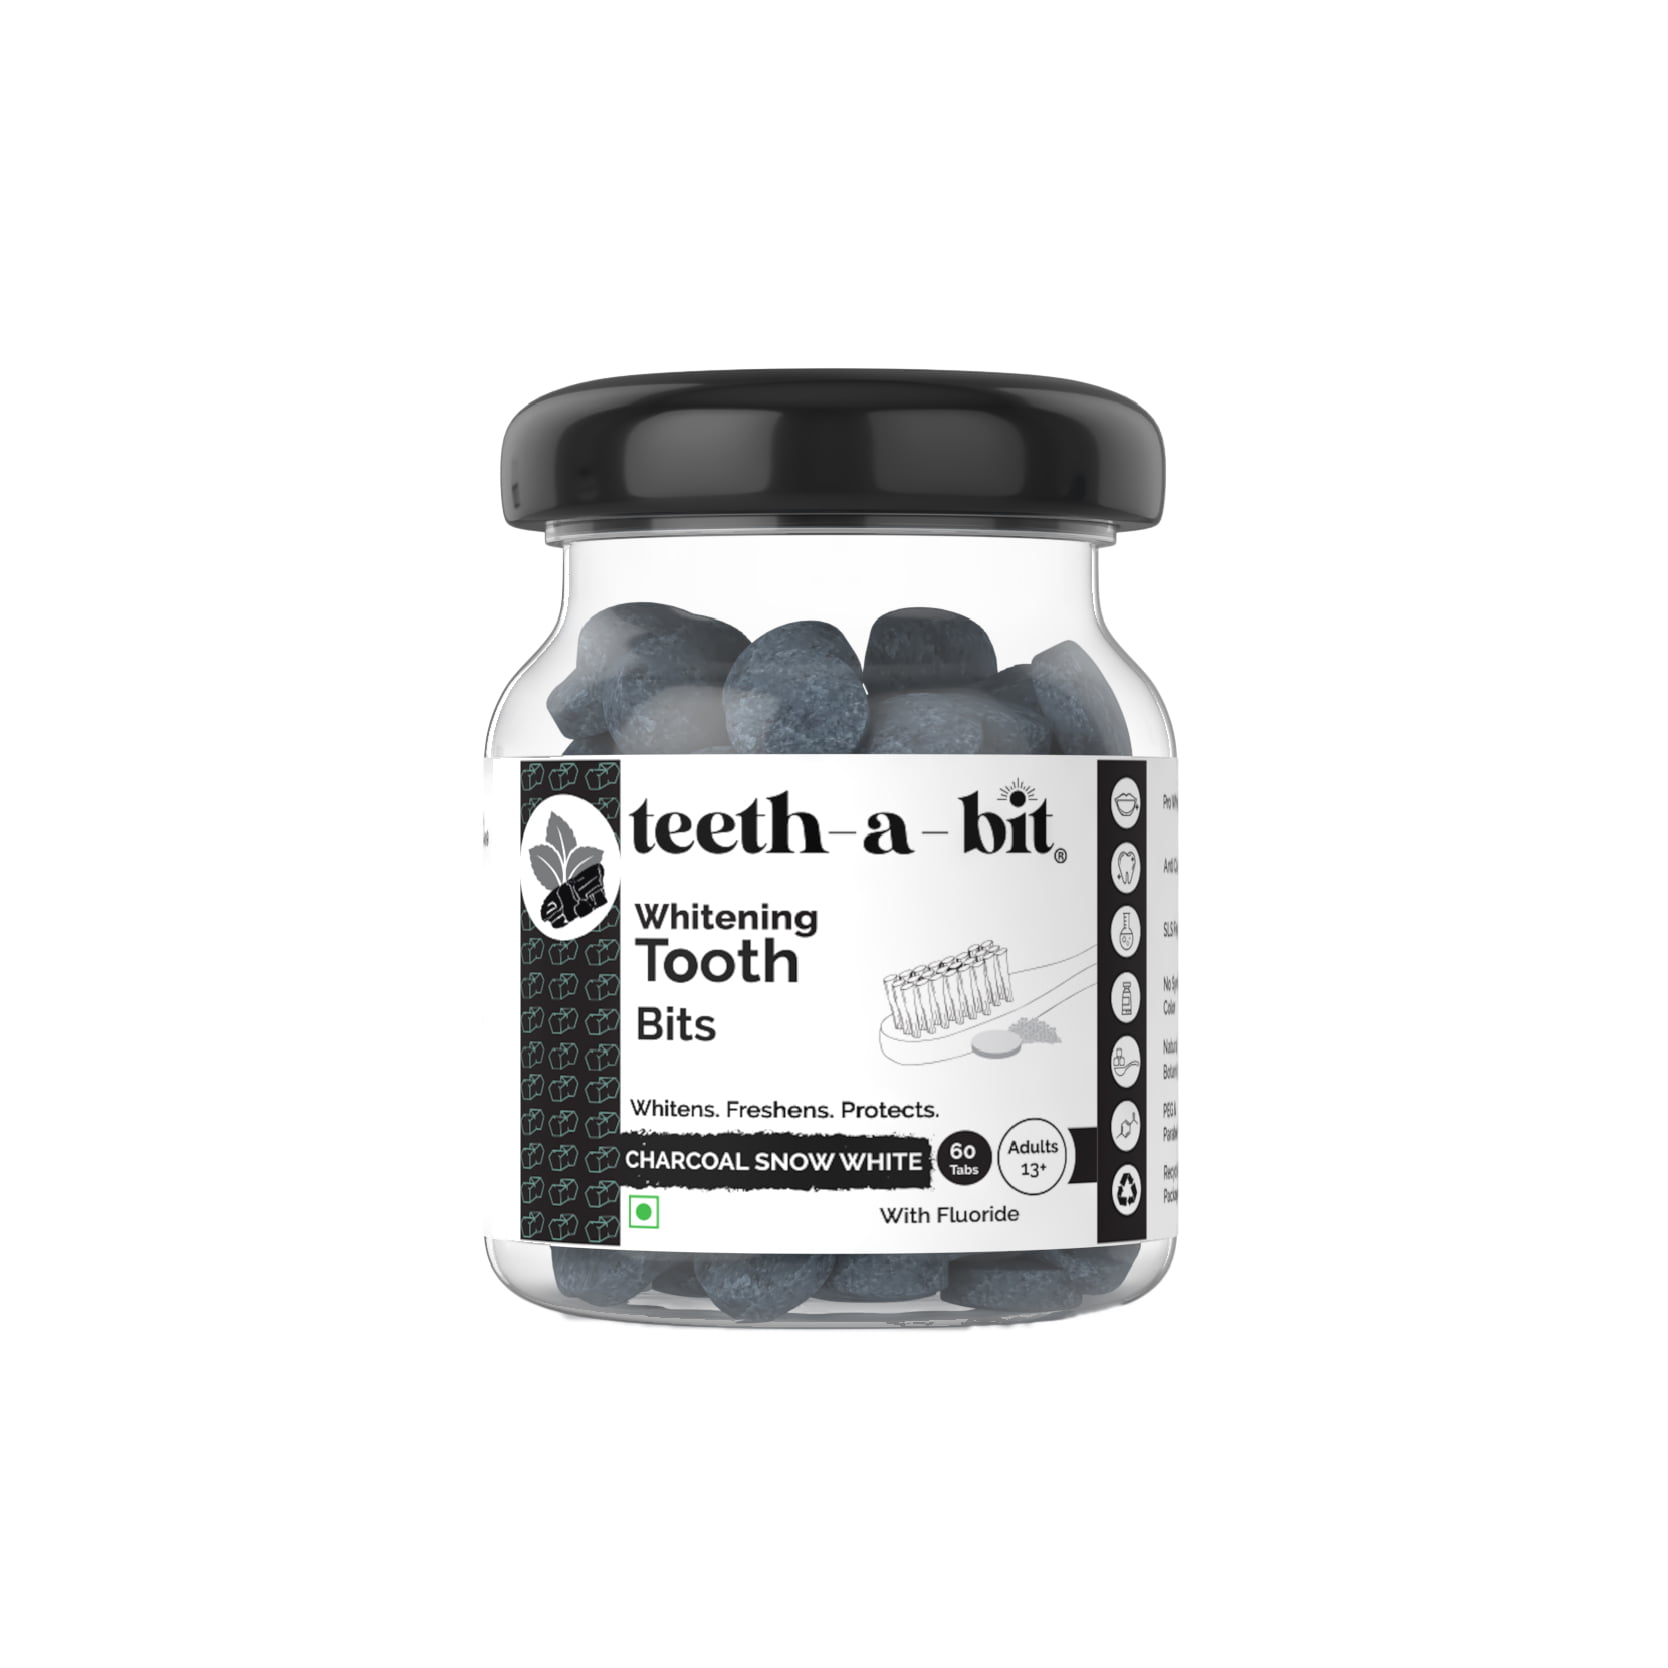 teeth-a-bit Snow White ‘Whitening Bamboo Charcoal Tooth bits’, plant-based toothpaste tablets, Enamel Safe, Stain Removal, SLS Free, Eco-friendly, Travel Friendly (60 Count)